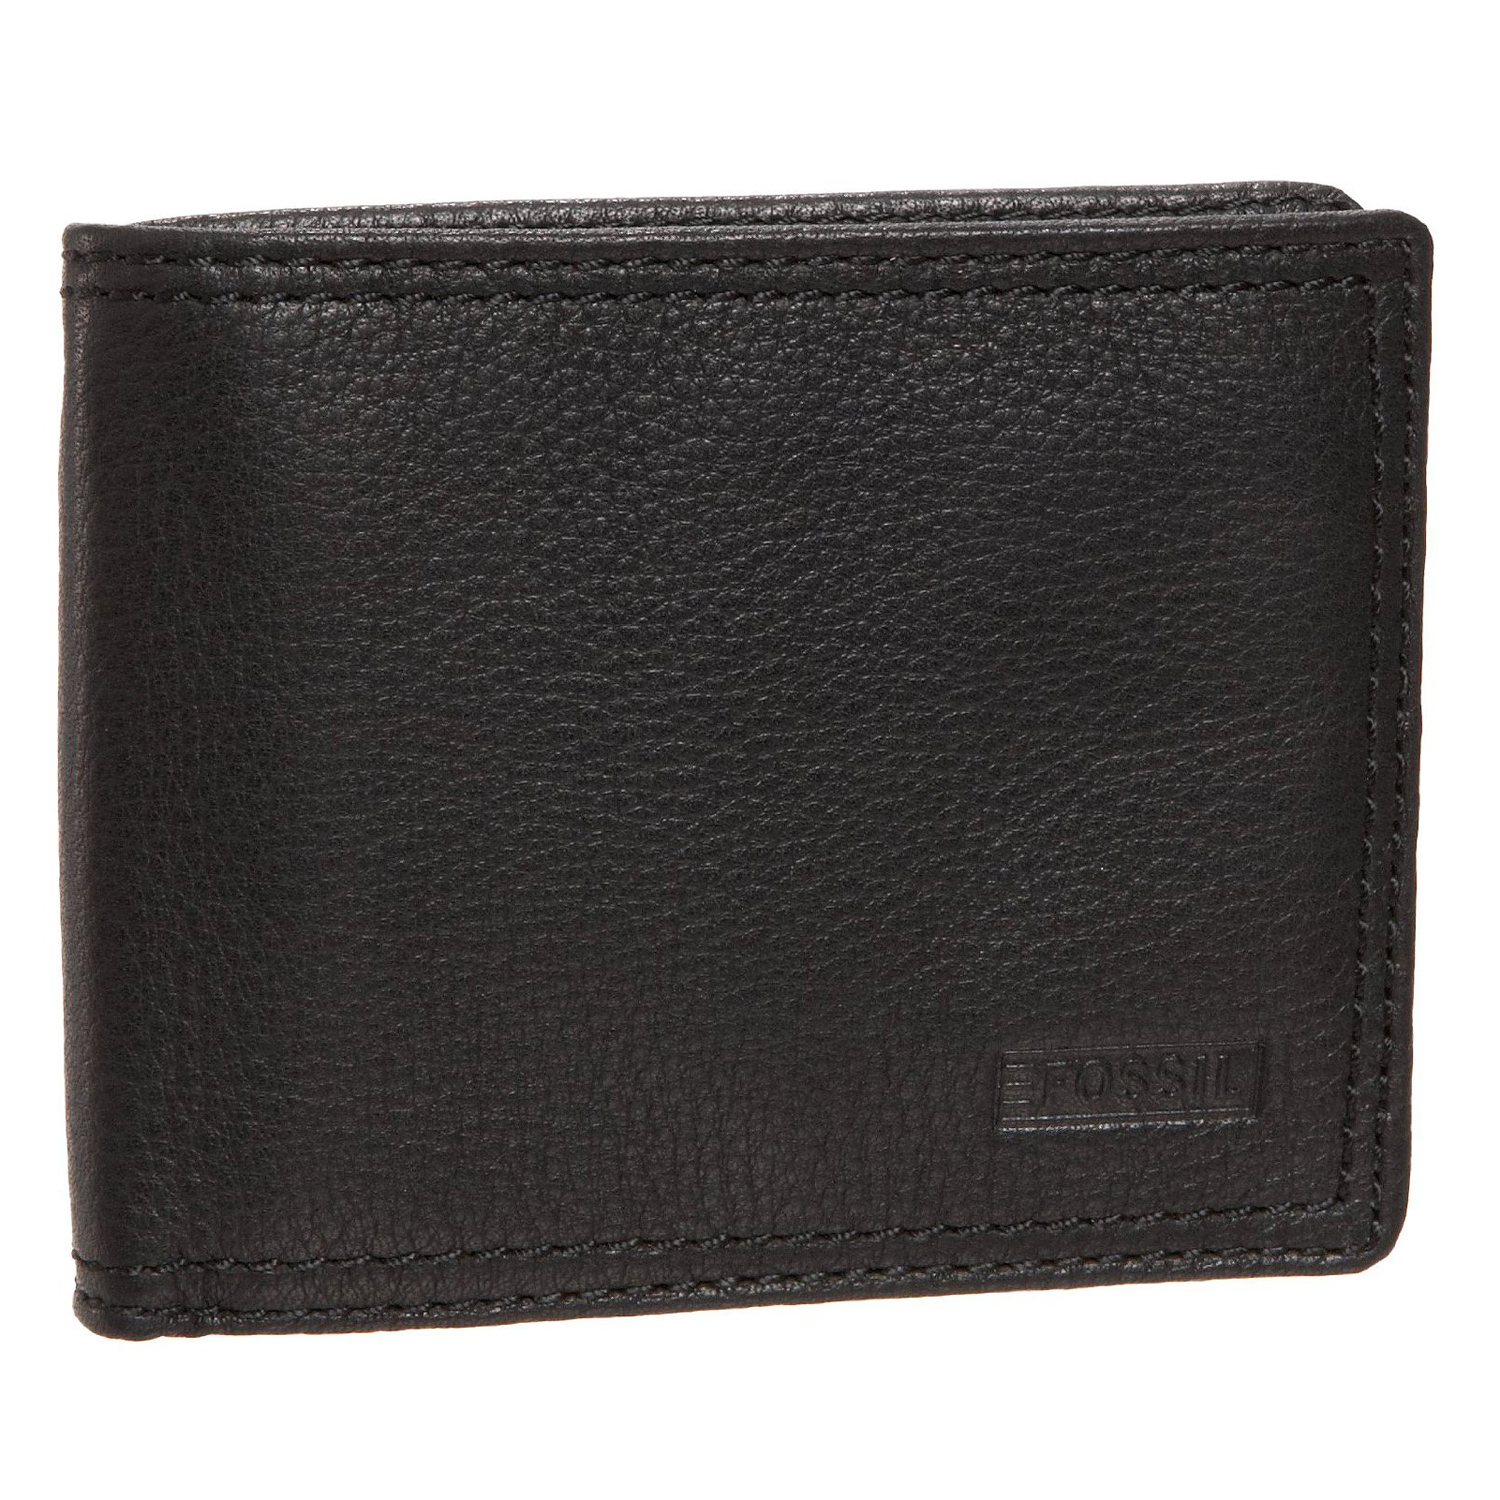 My loss is your gain!: Fossil Men&#39;s &#39;Midway&#39; Traveler Leather Wallet - Black